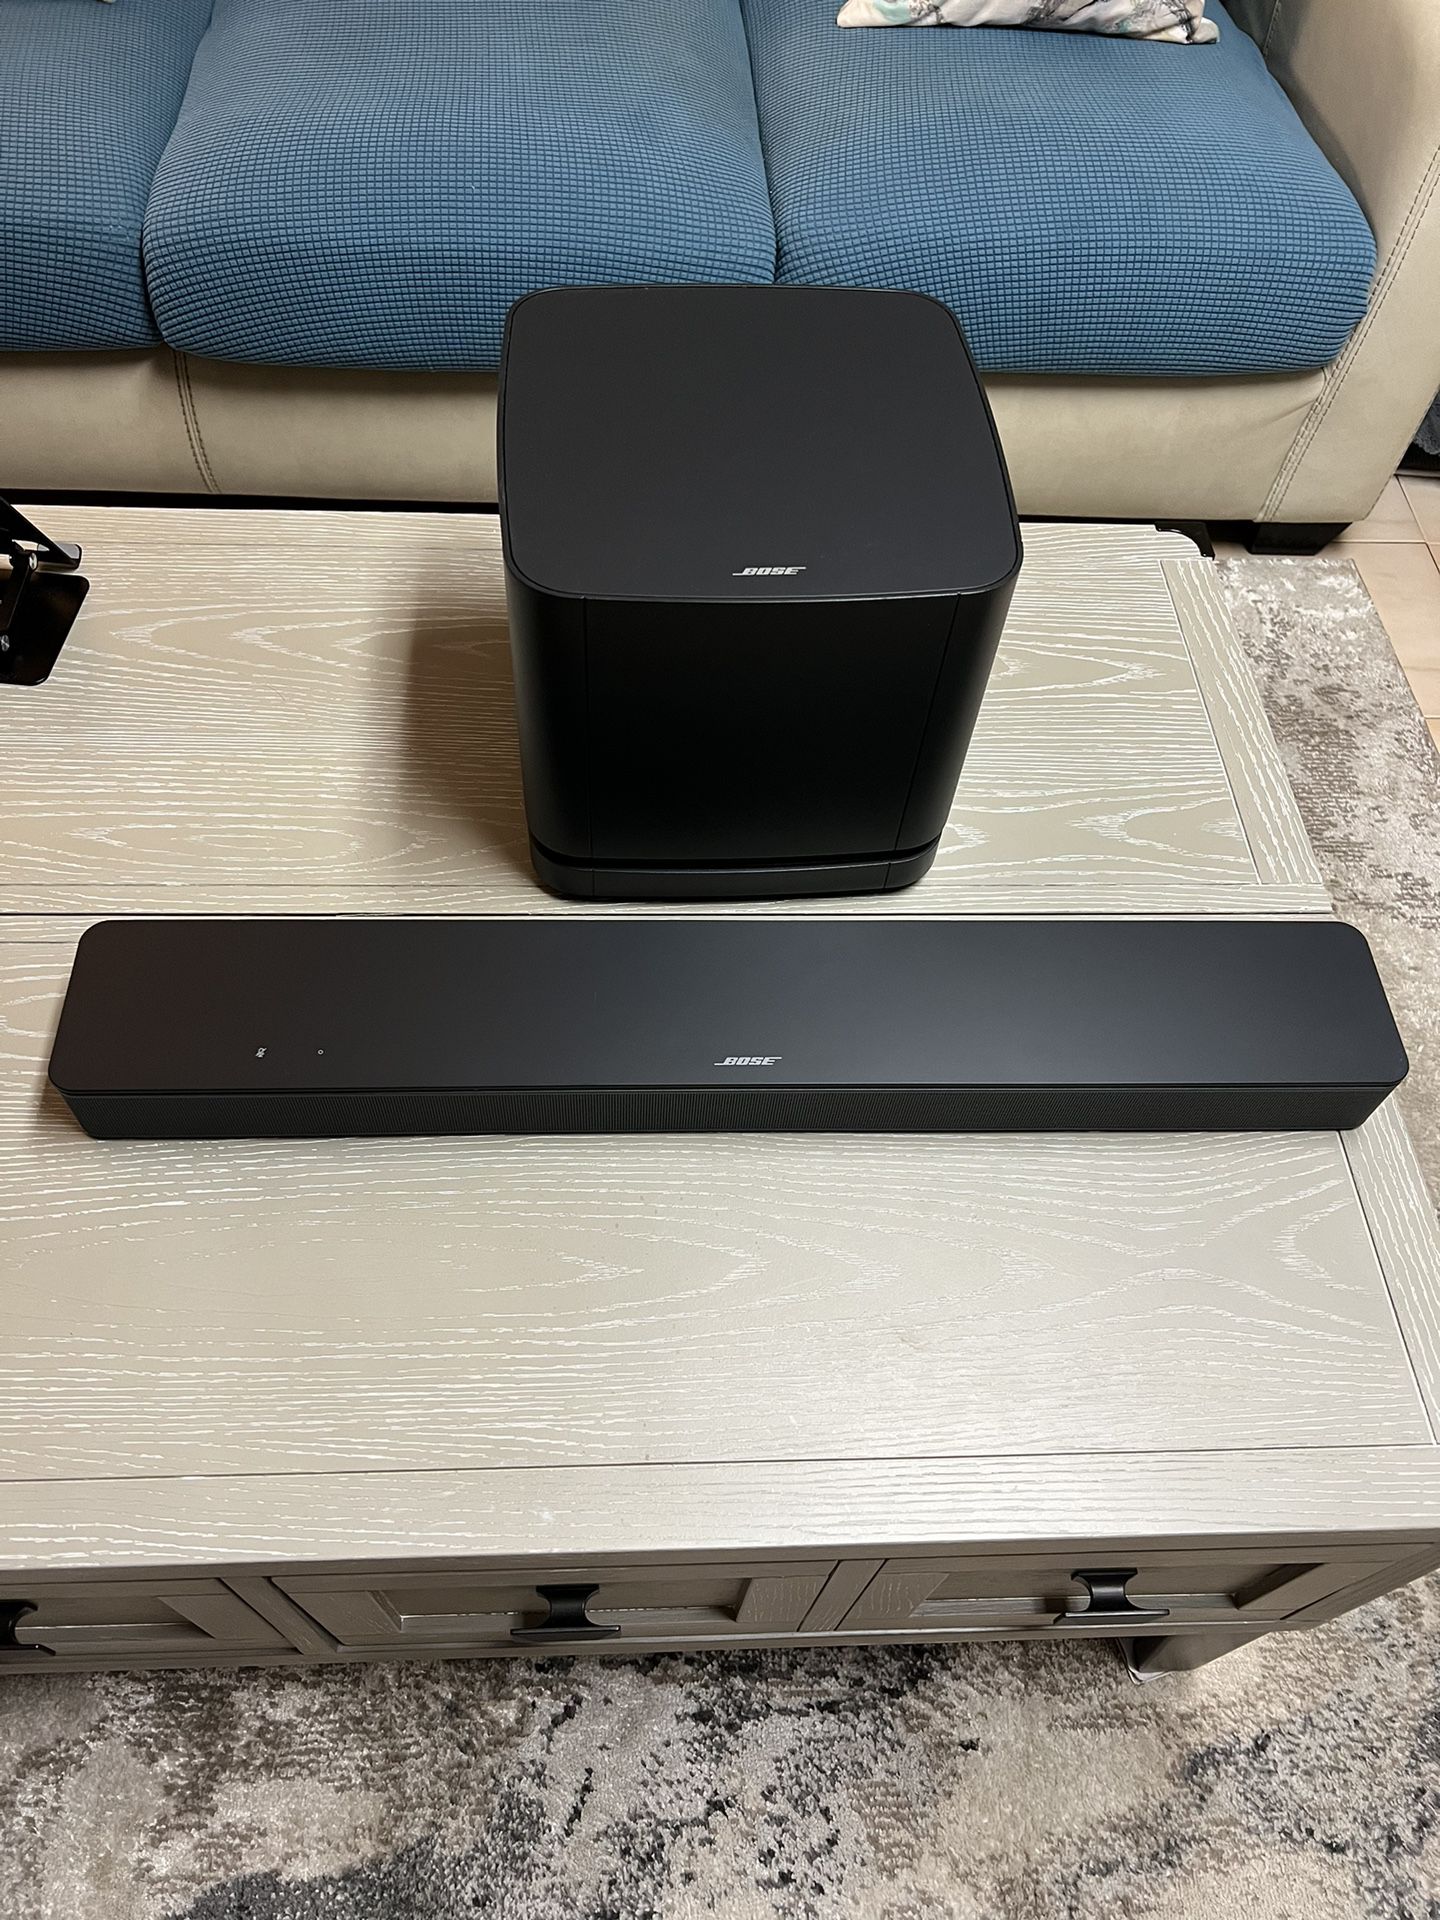 Bose Sound Bar Smart 300 With Subwoofer 500 As New